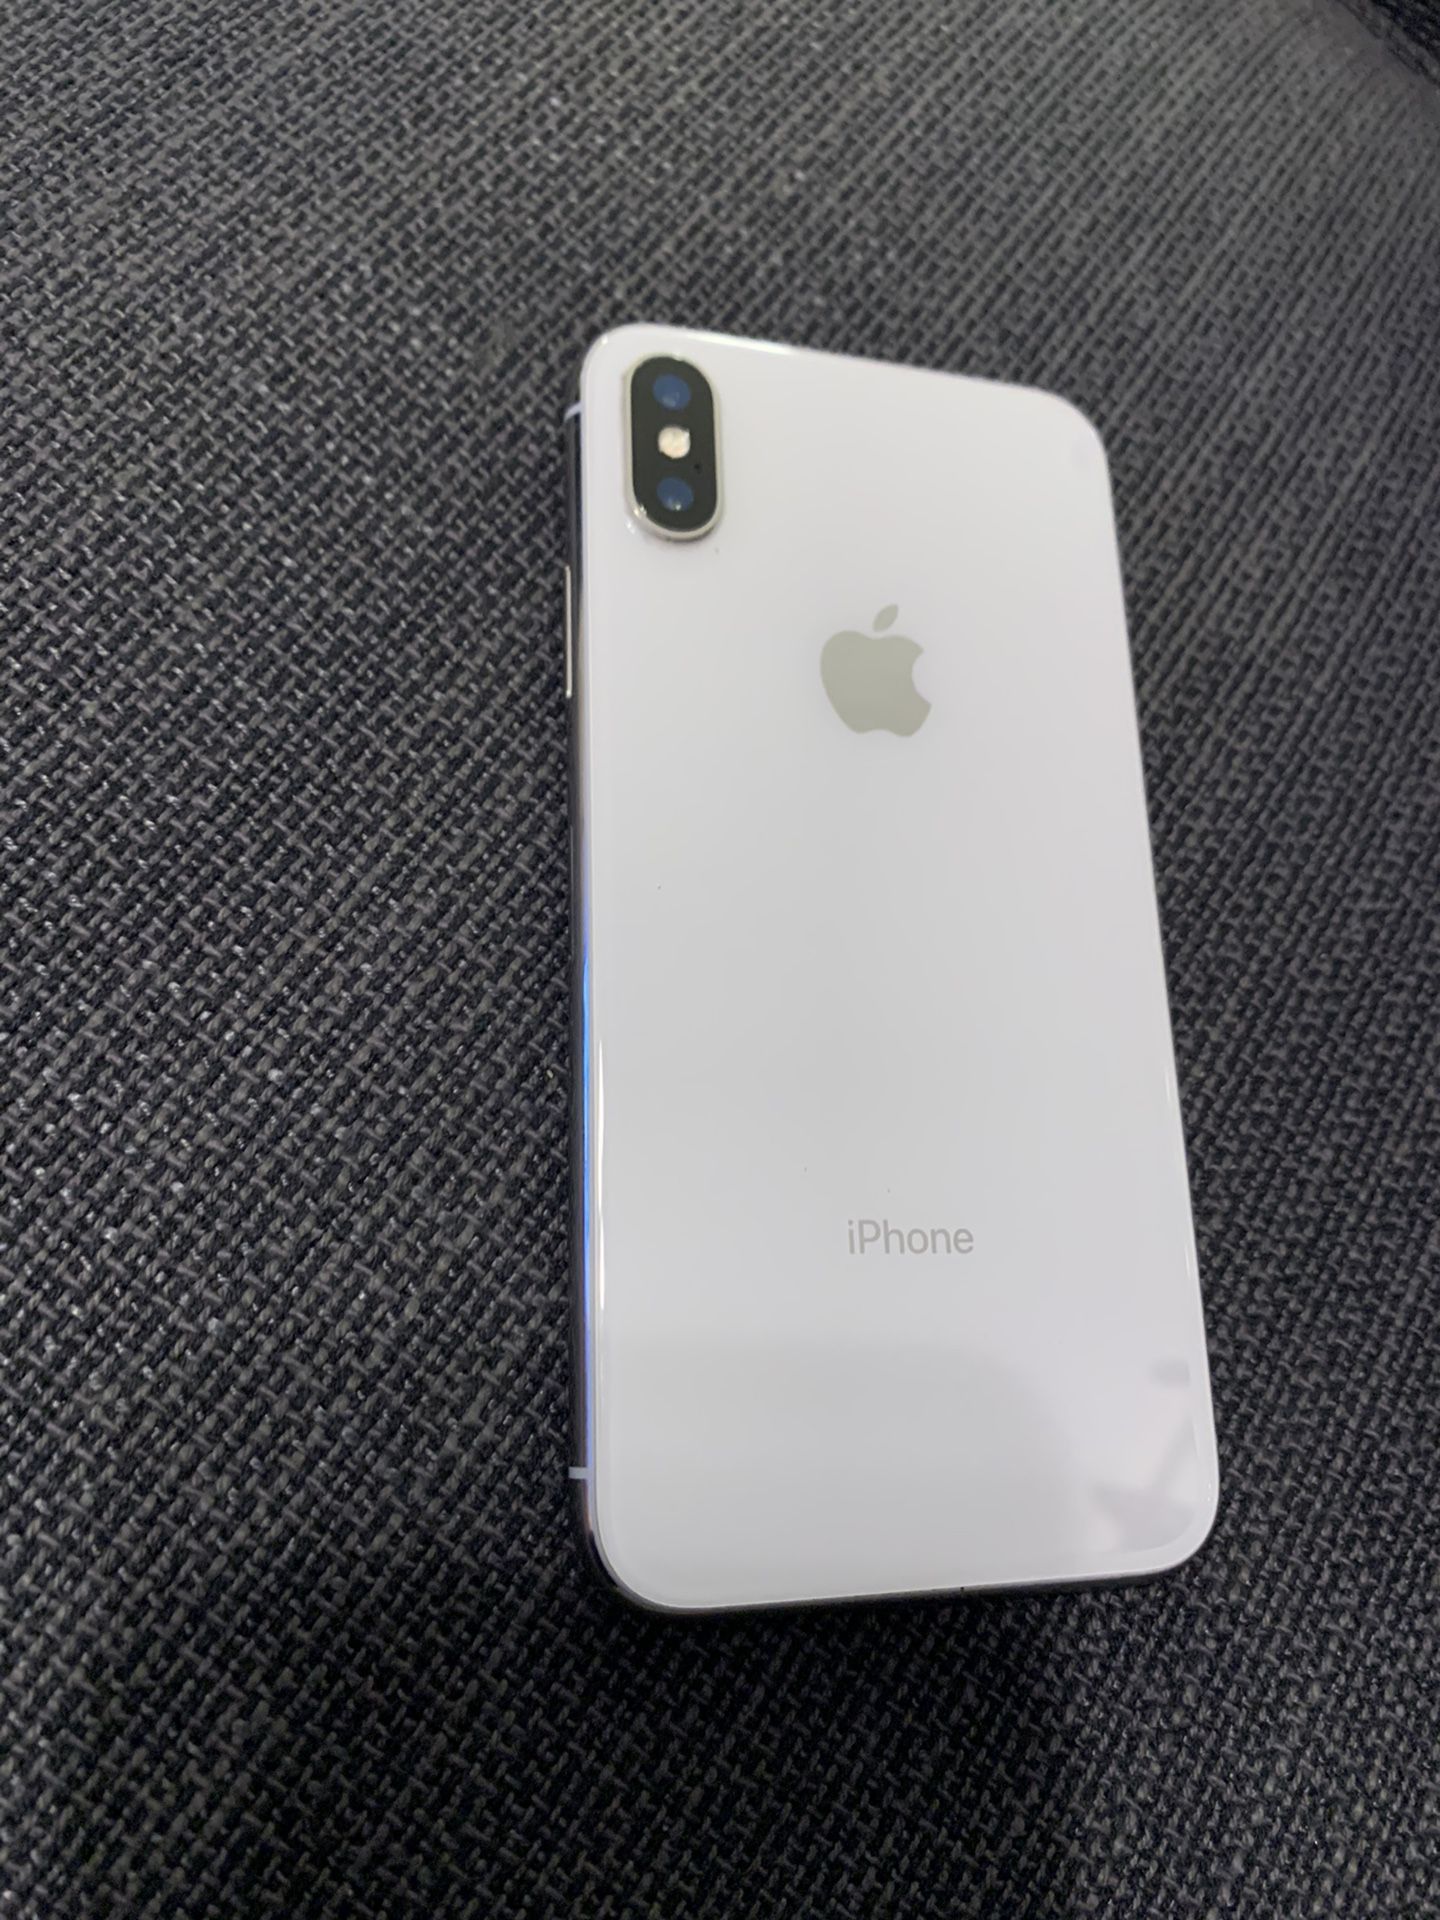 Iphone x 256 gb unlocked perfect condition some blemishes on stainless steel bumper from case but thats it kept in perfect condition